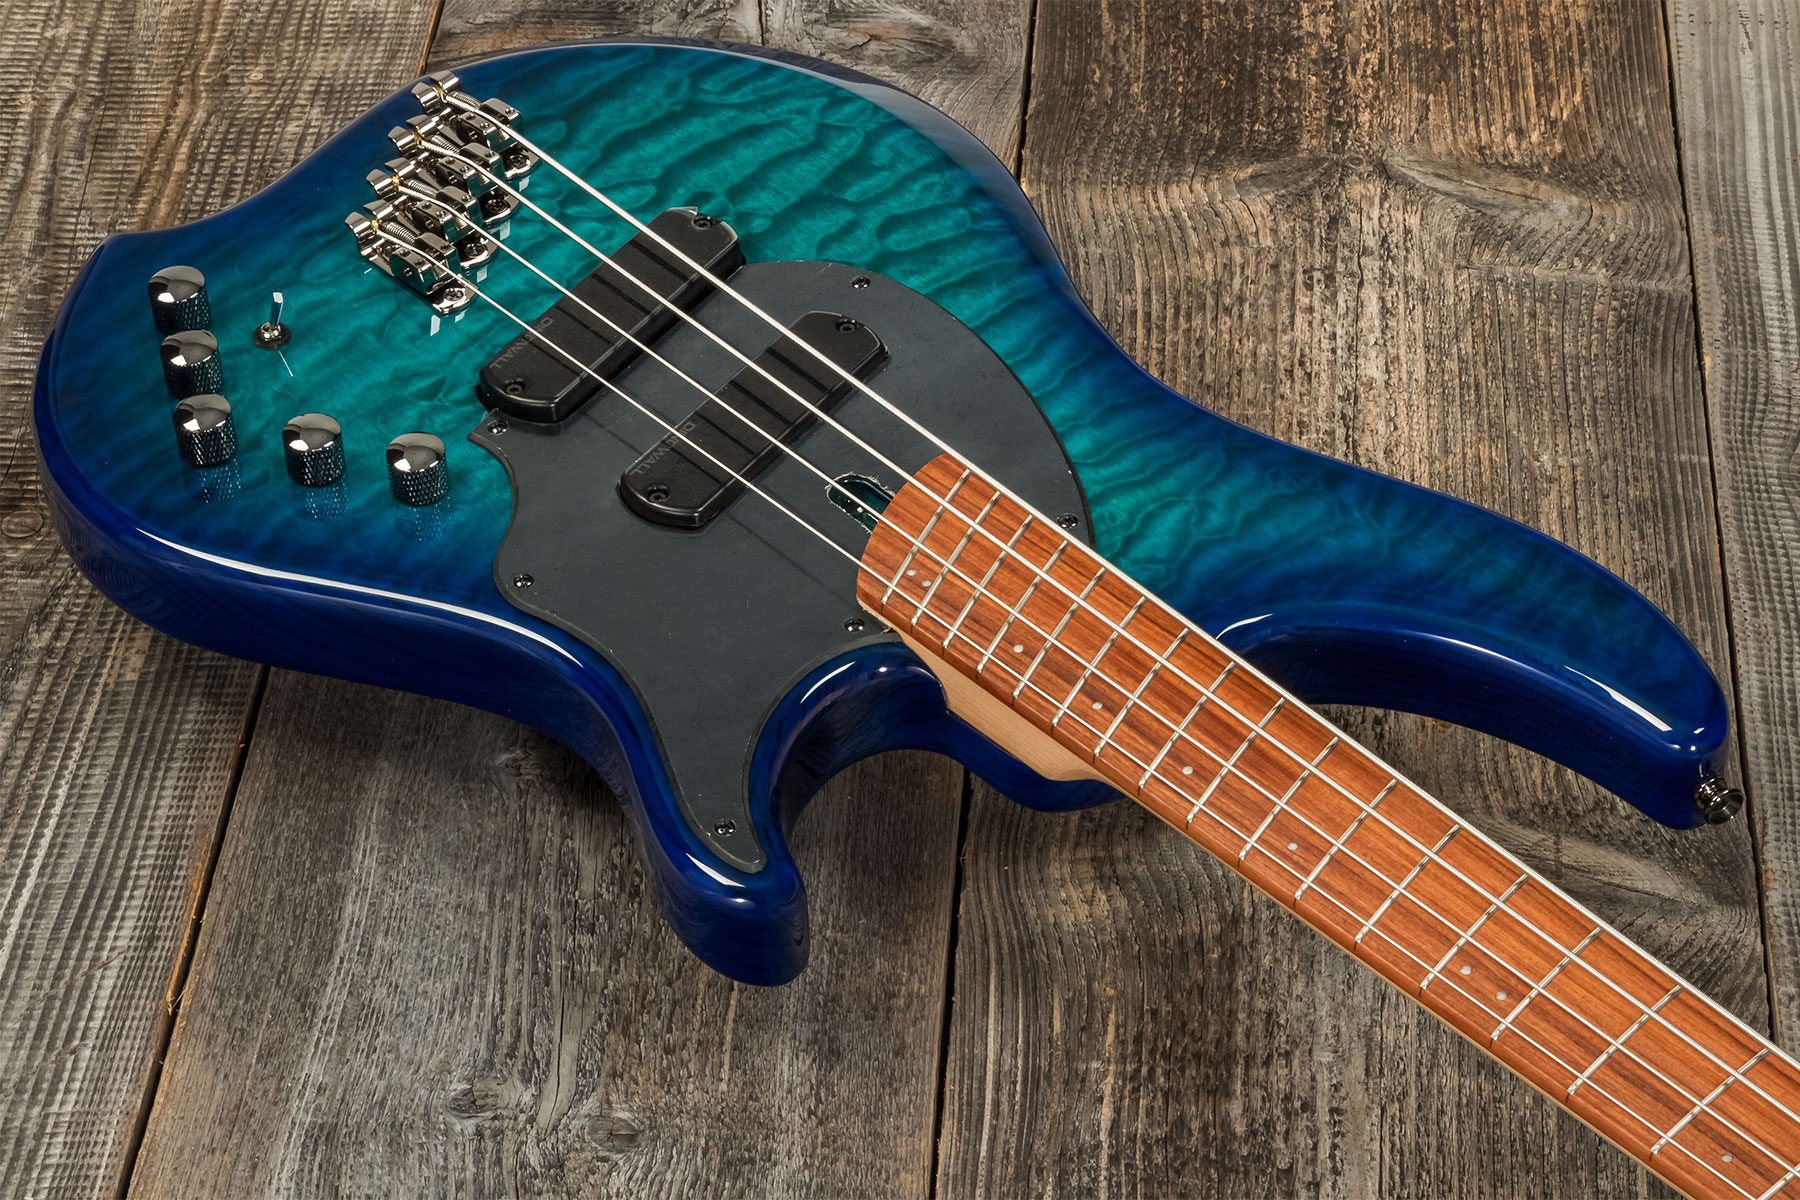 Dingwall Combustion Cb2 4c 2pu Active Pf - Whalepool Burst - Solid body electric bass - Variation 2